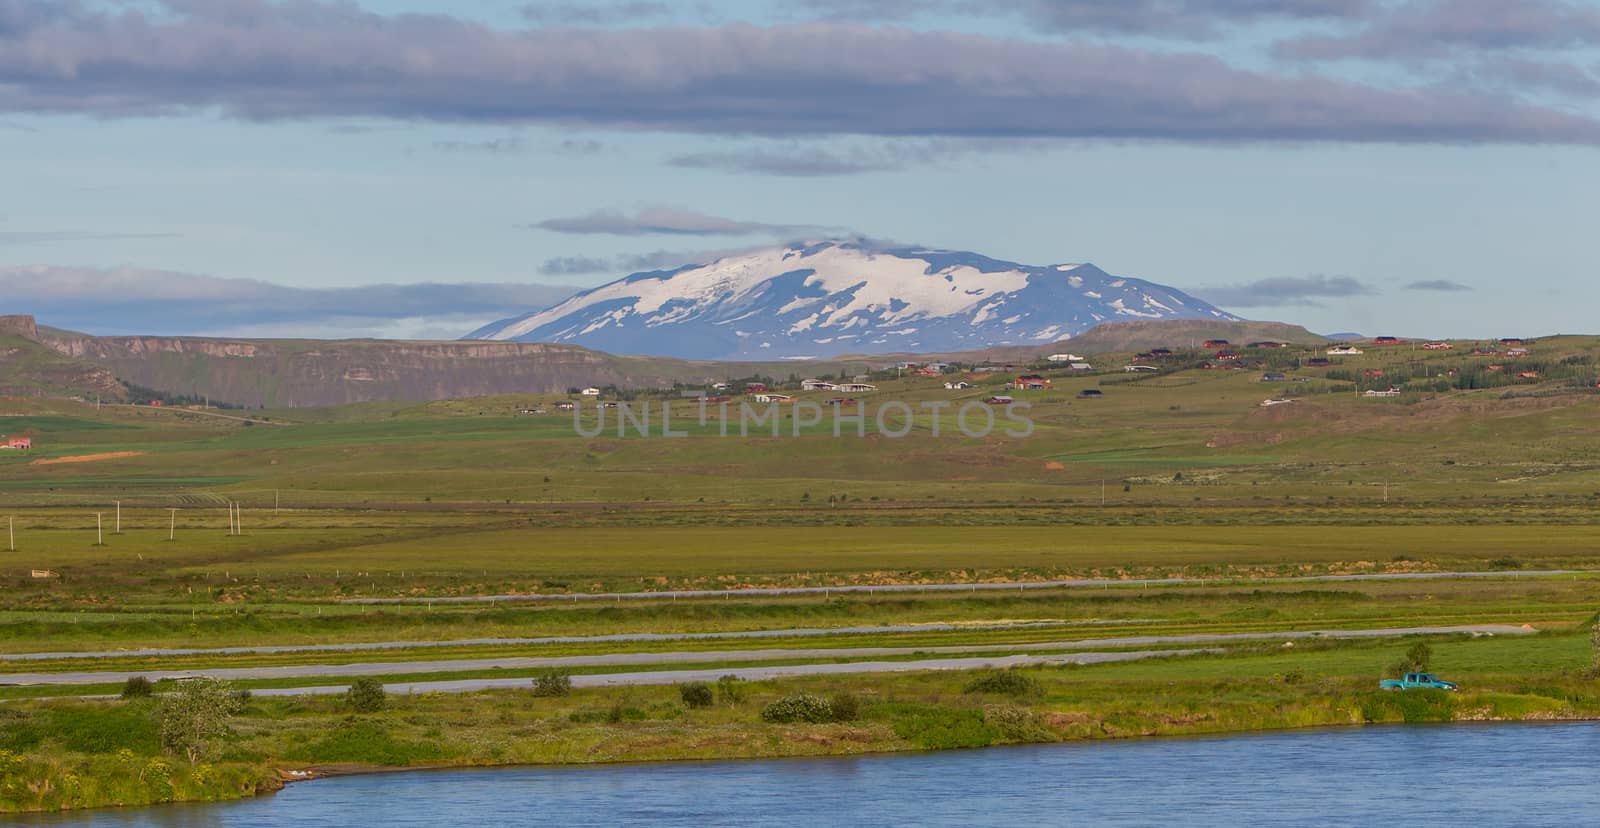 The volcano Hekla in Iceland shot in summer, old overrgrown lavafield in the foreground